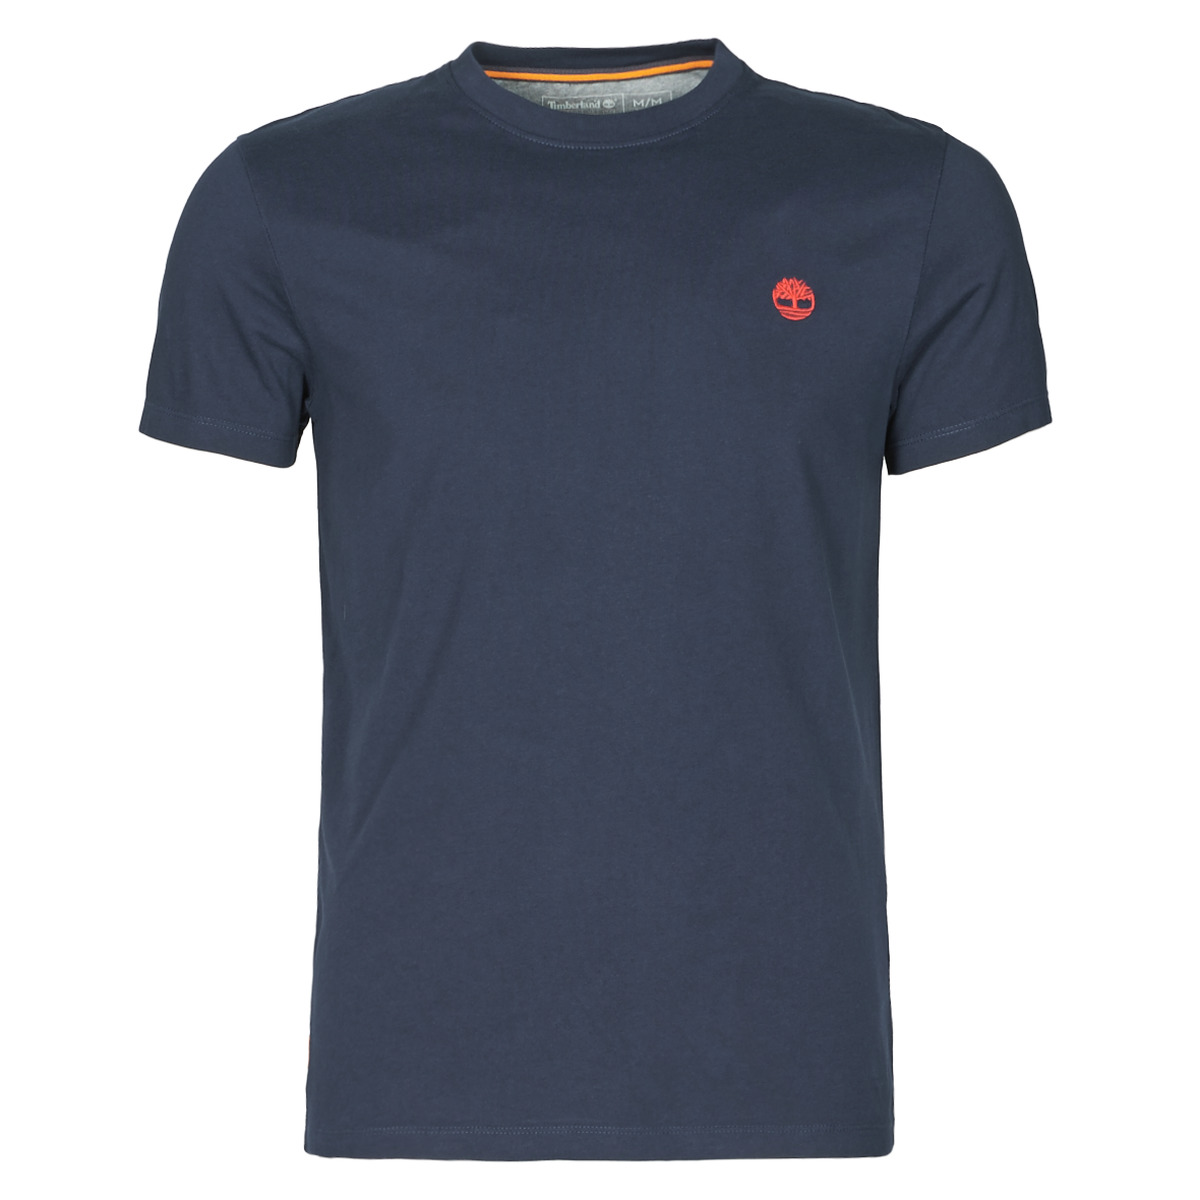 Clothing | TEE short-sleeved SLIM POCKET Timberland - Men delivery RIVER Marine DUNSTAN 33,00 Spartoo Fast t-shirts - SS ! Europe €